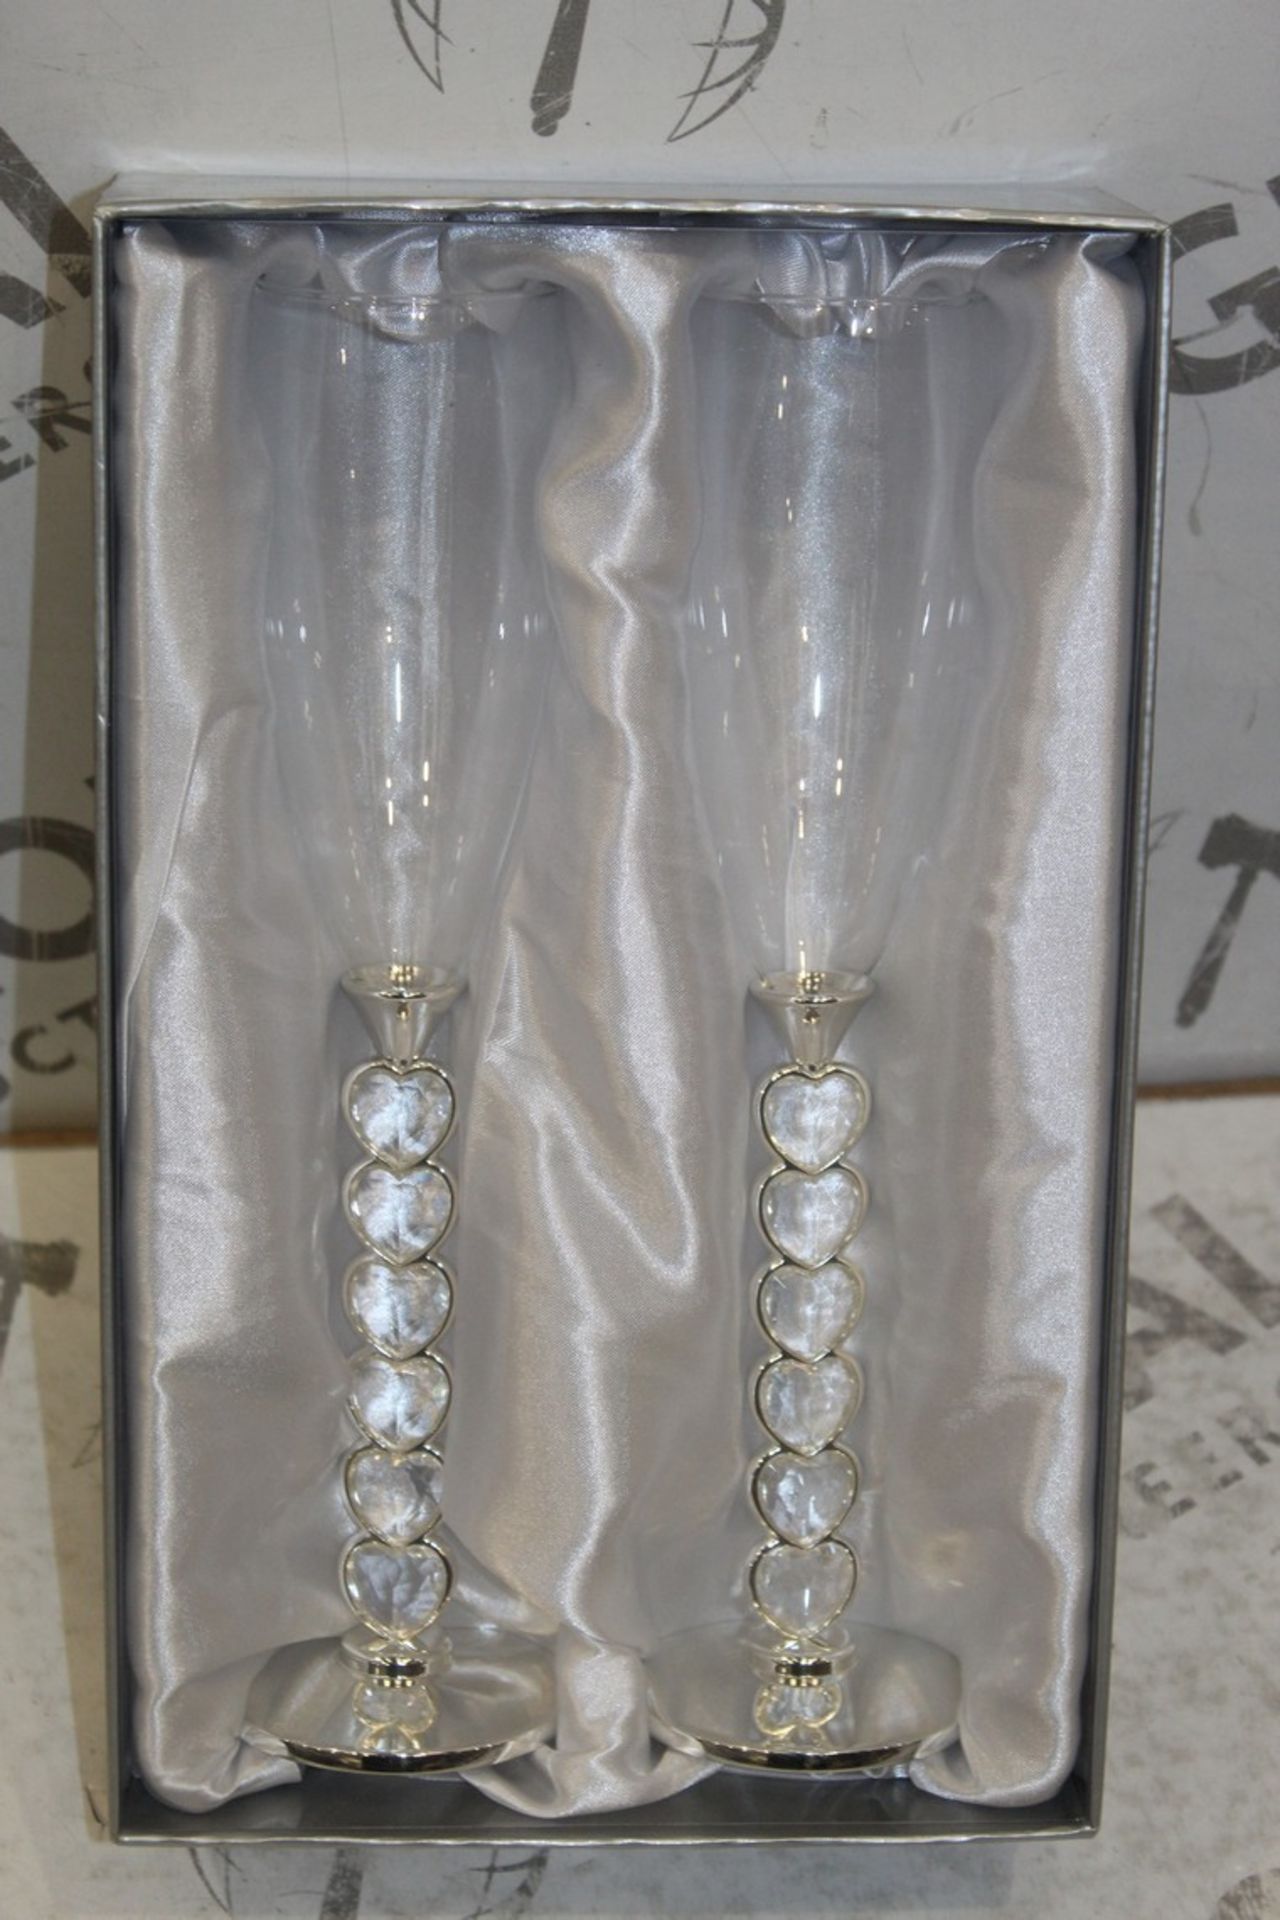 Lot To Contain 3 Brand New Pairs Of 2 Heart Stem Champagne Flutes RRP £75 (Pictures Are For